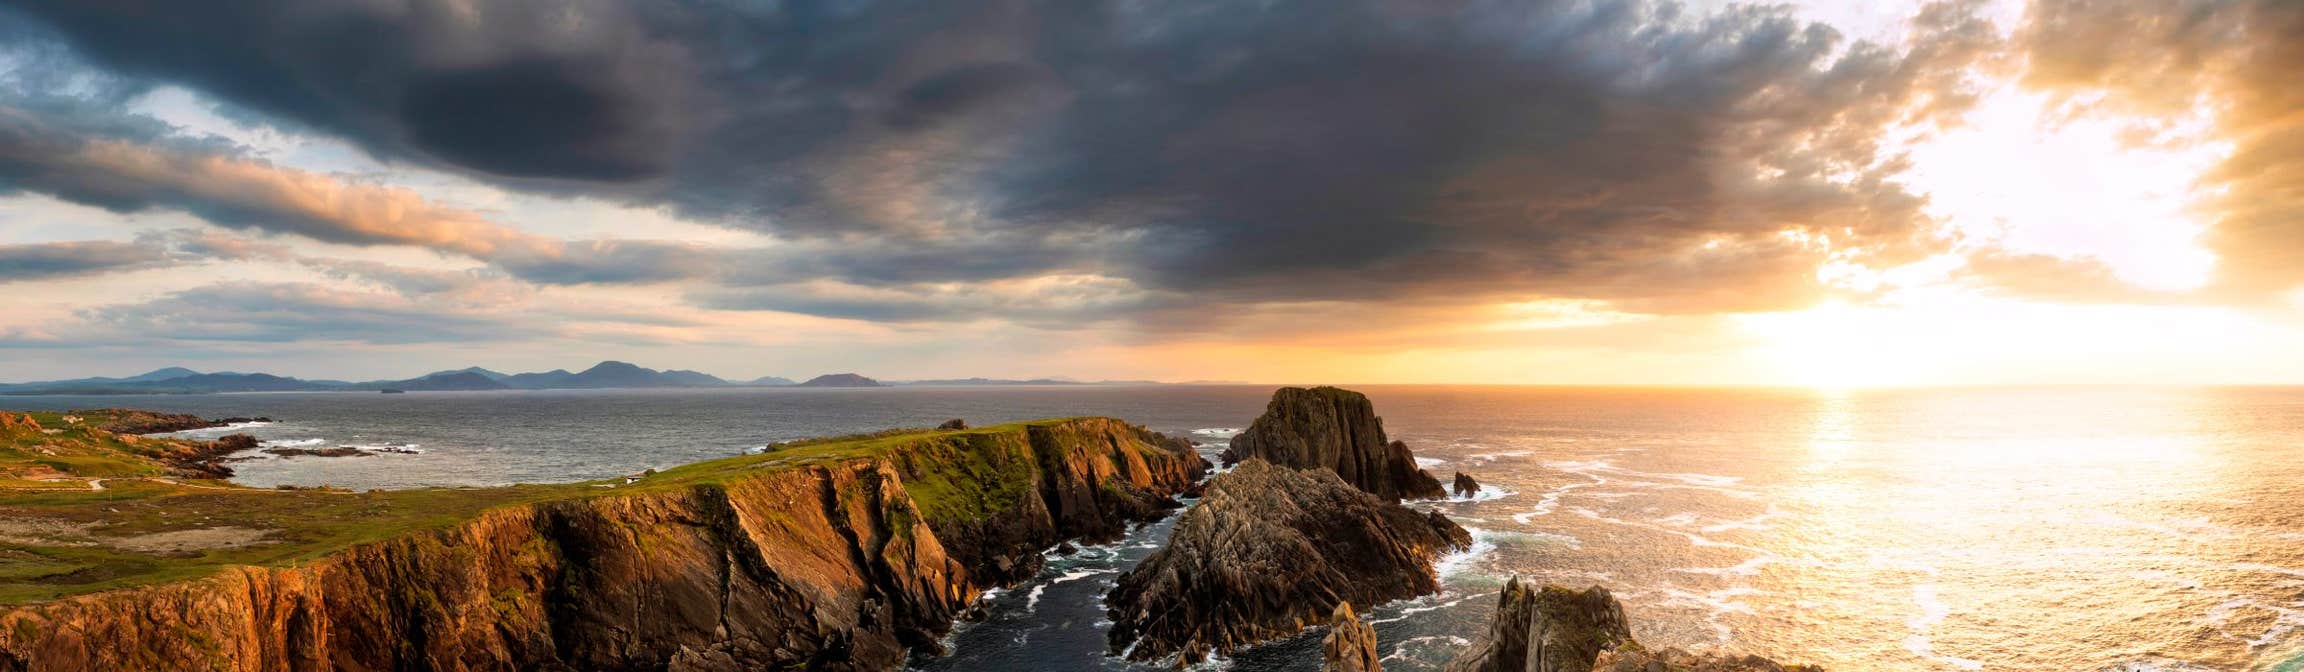 A sunset behind rocks at Malin Head in Donegal